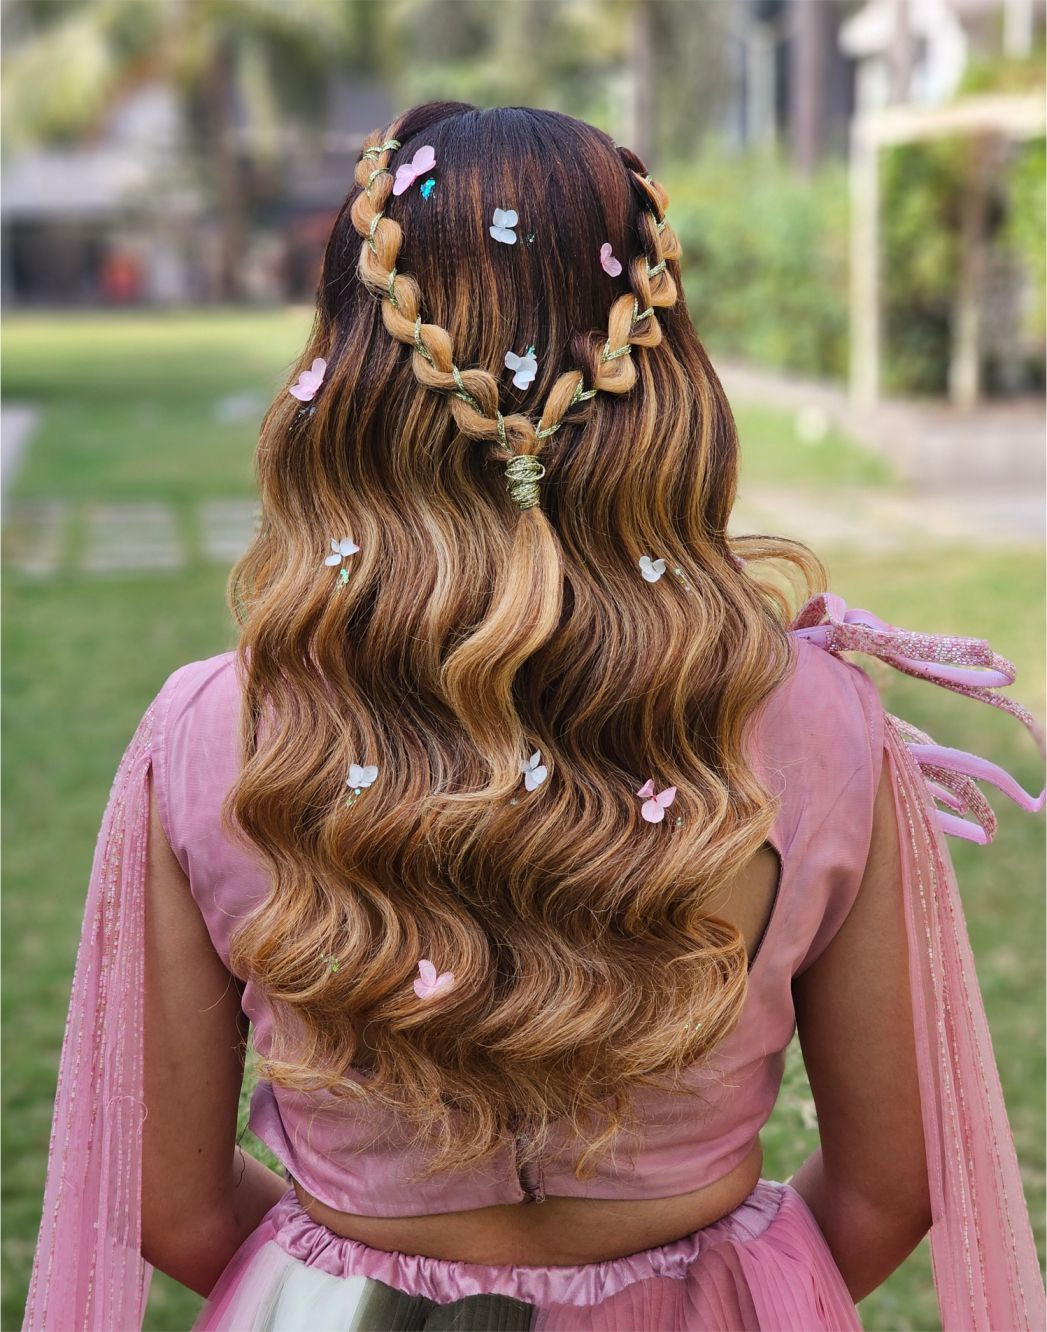 Wavy Curls With Open Hair Style - Rl0037